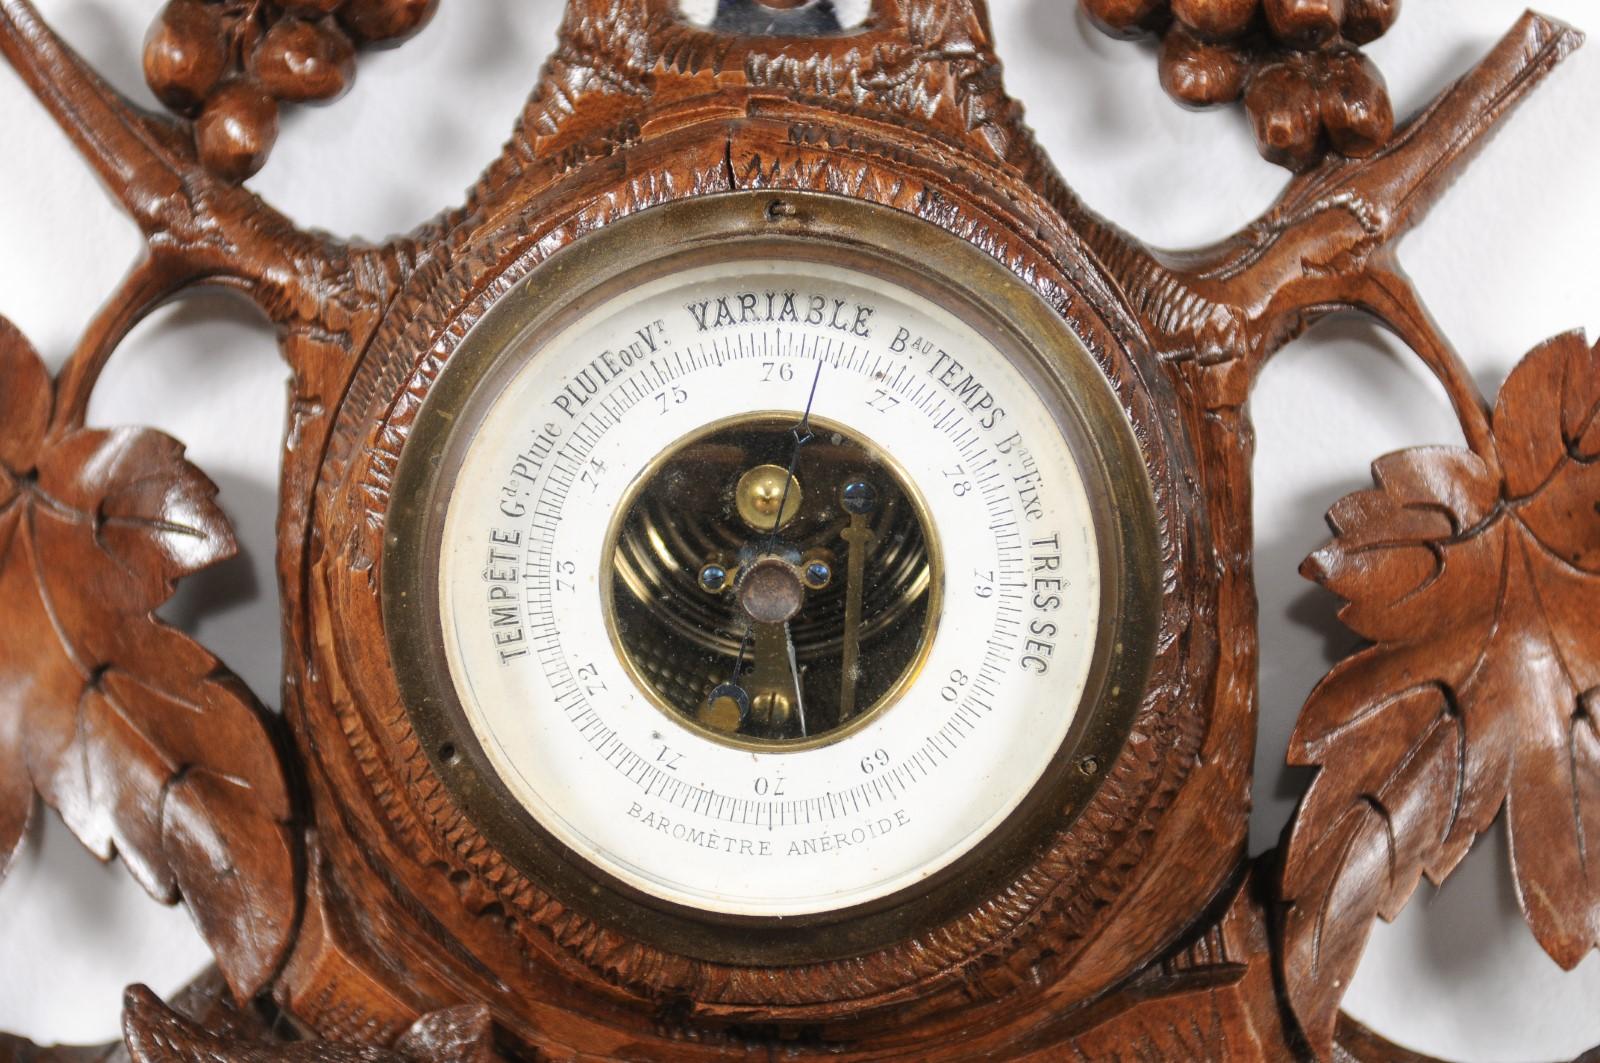 20th Century Black Forest 1920s Carved Aneroid Barometer with Foliage, Bird and Fox Motifs